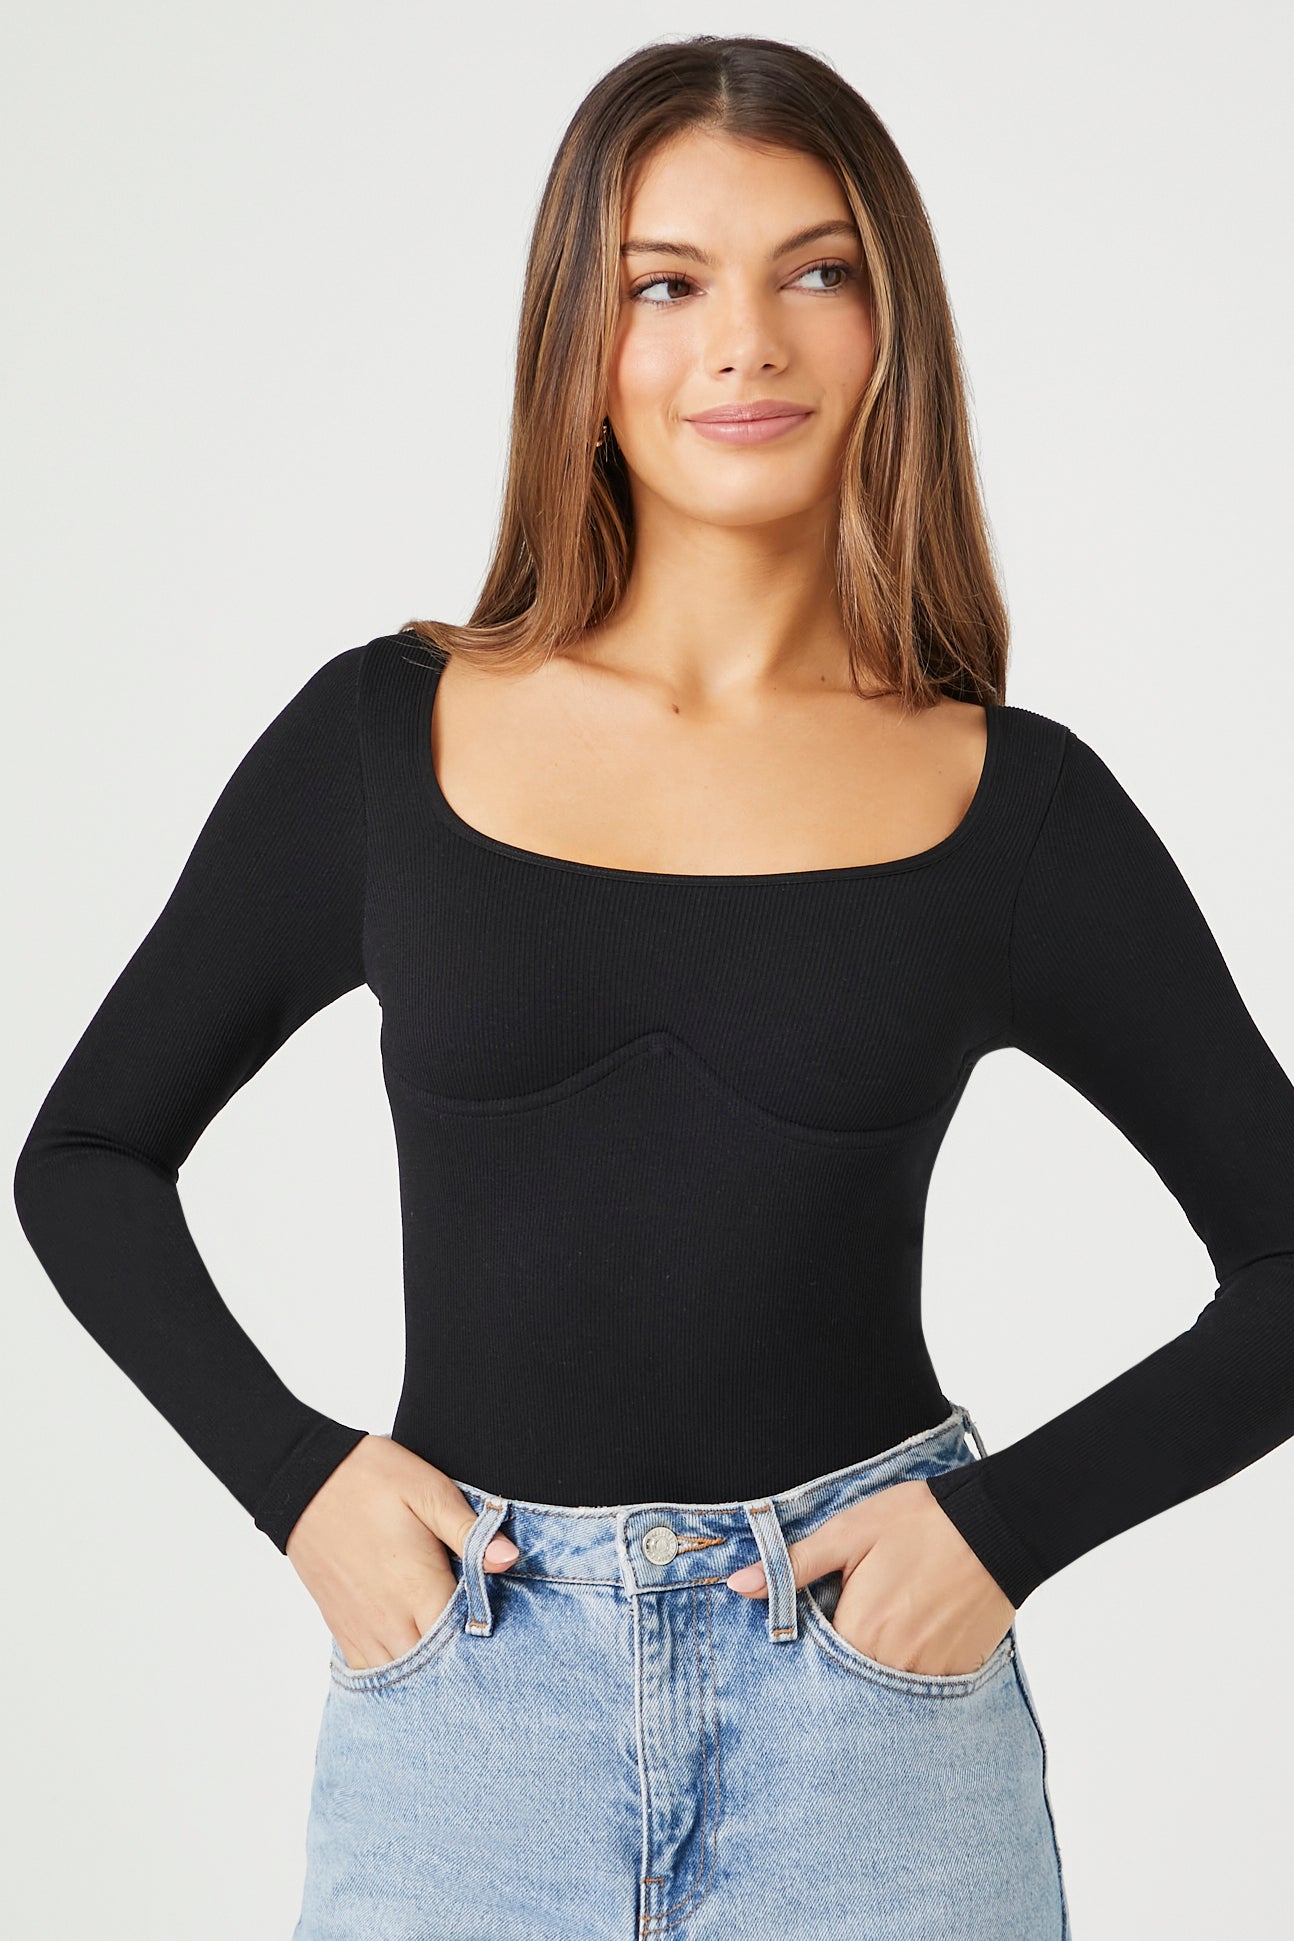 Seamless Cut-Out Back Bodysuit